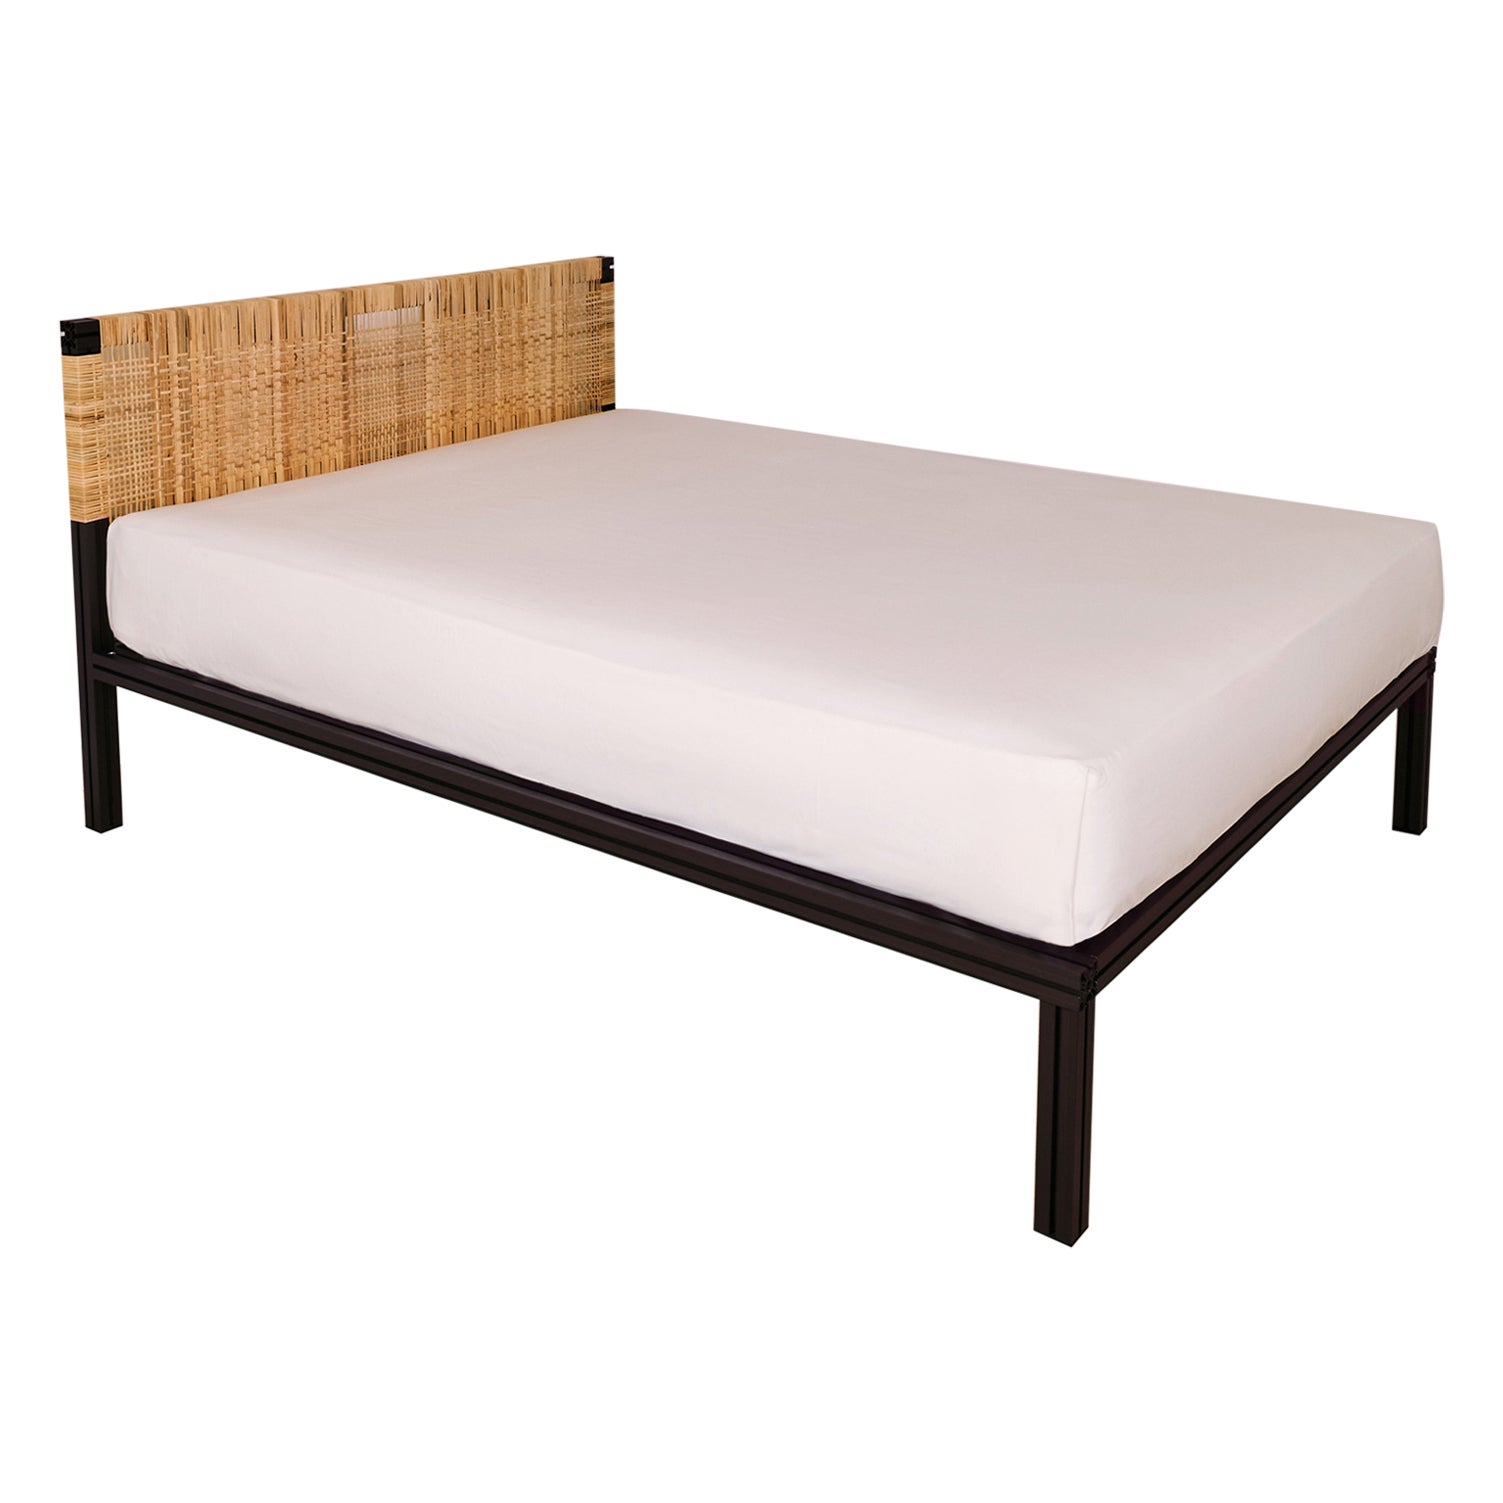 Dark Brown Aluminium Bed (frame) with Cane Headboard from Anodised Wicker Coll. For Sale